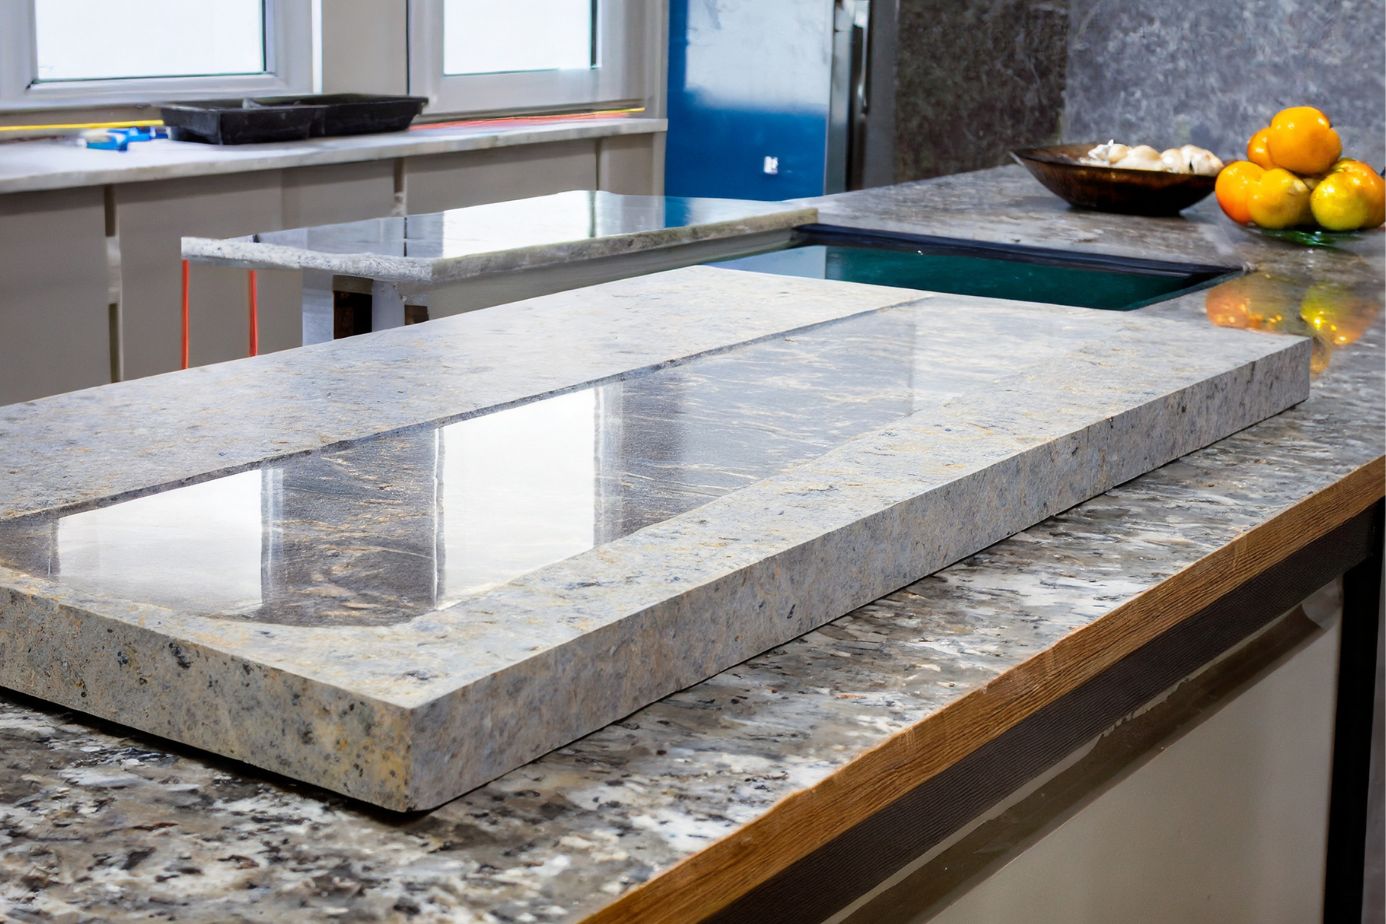 Prefabricated Granite Countertops - Kitchen counter with sink and countertop